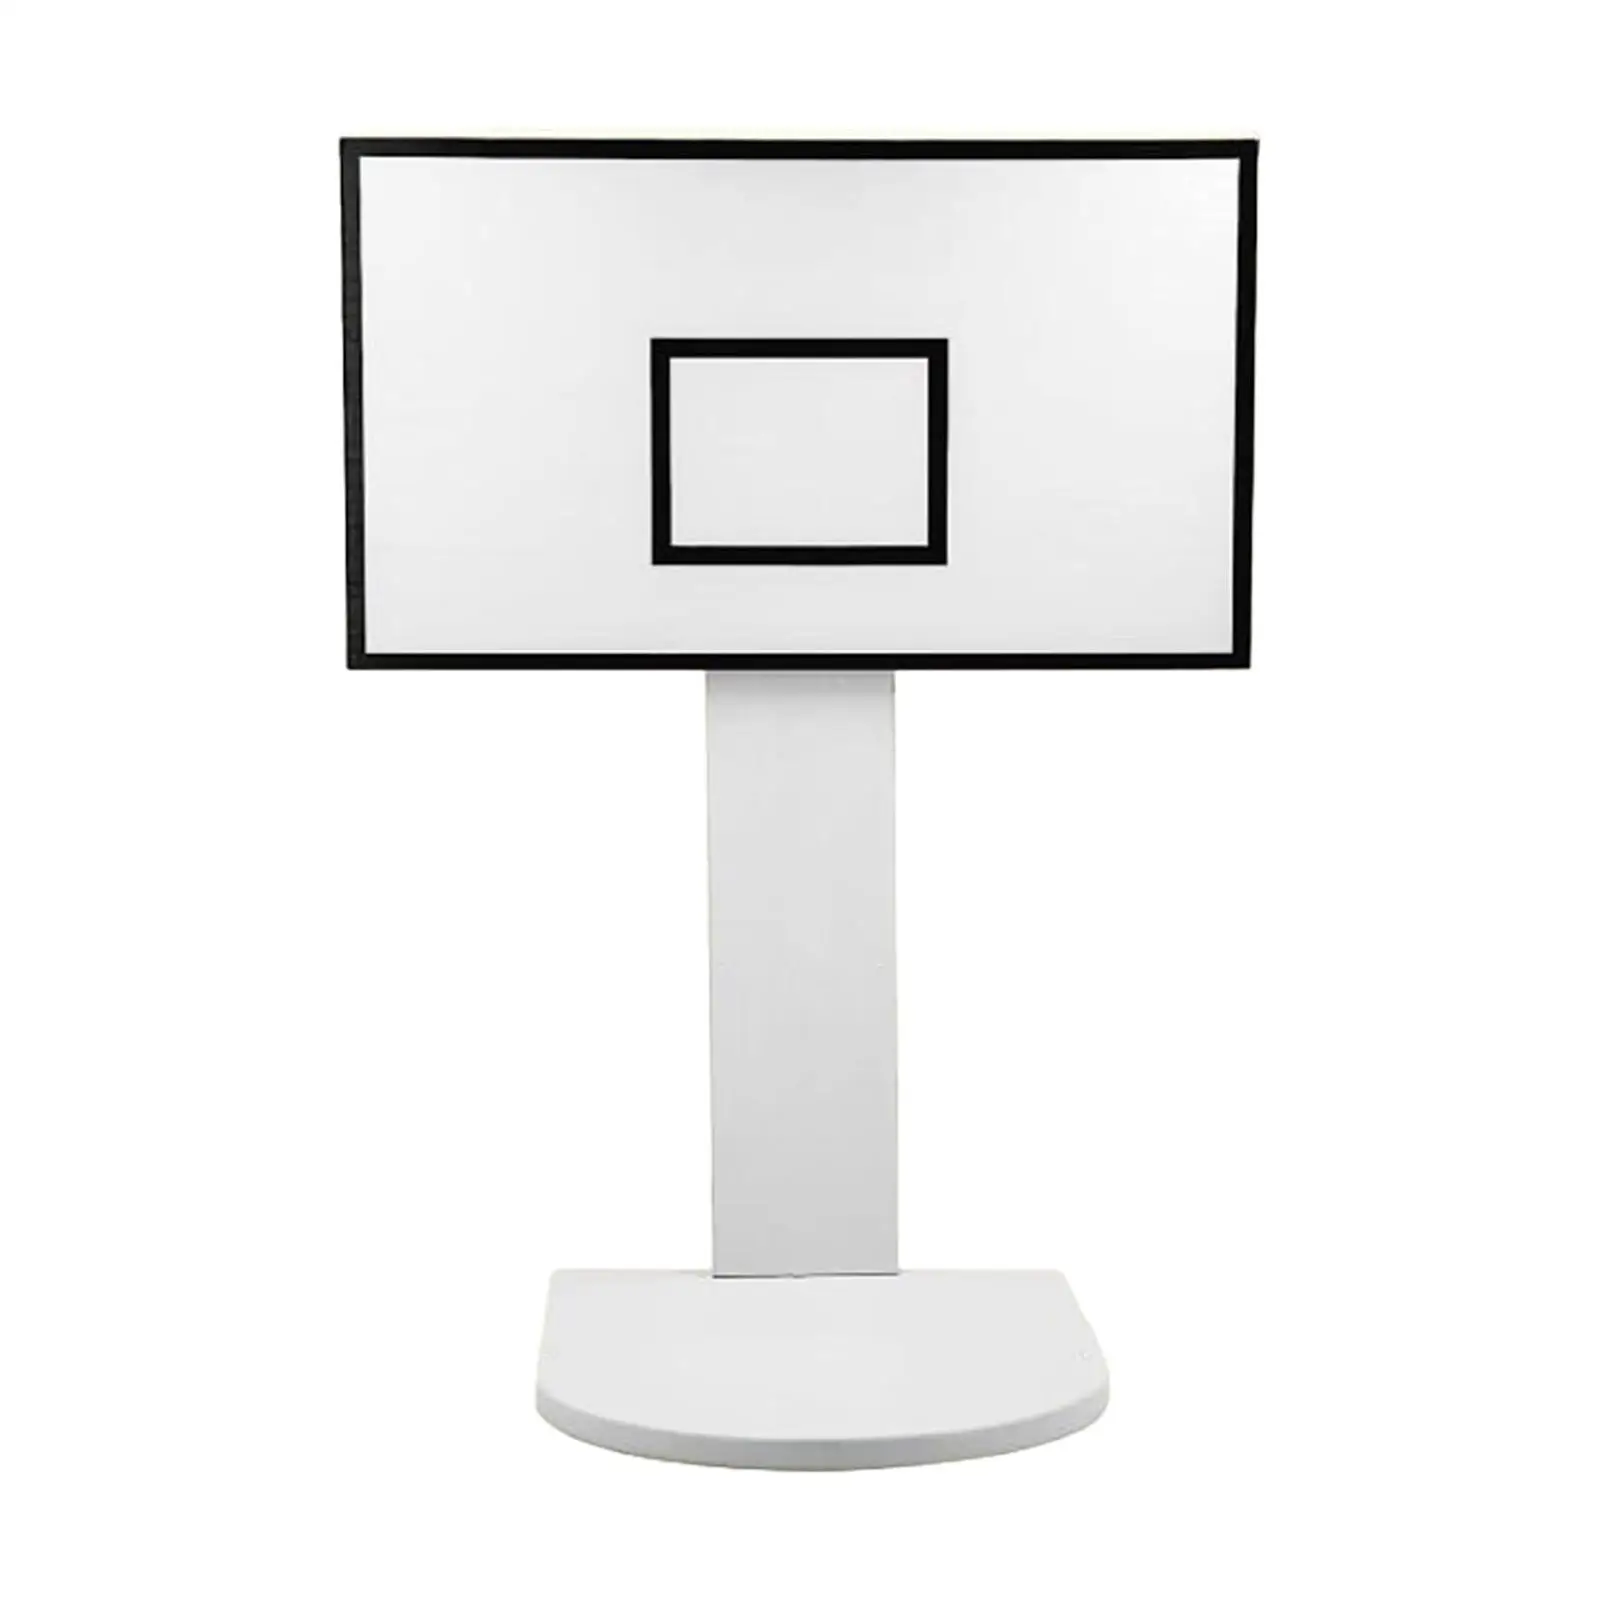 Basketball Rack without Rubbish Bin Garbage Can Basketball Frame Basketball Hoop for Living Room Office Home Kitchen Bedroom